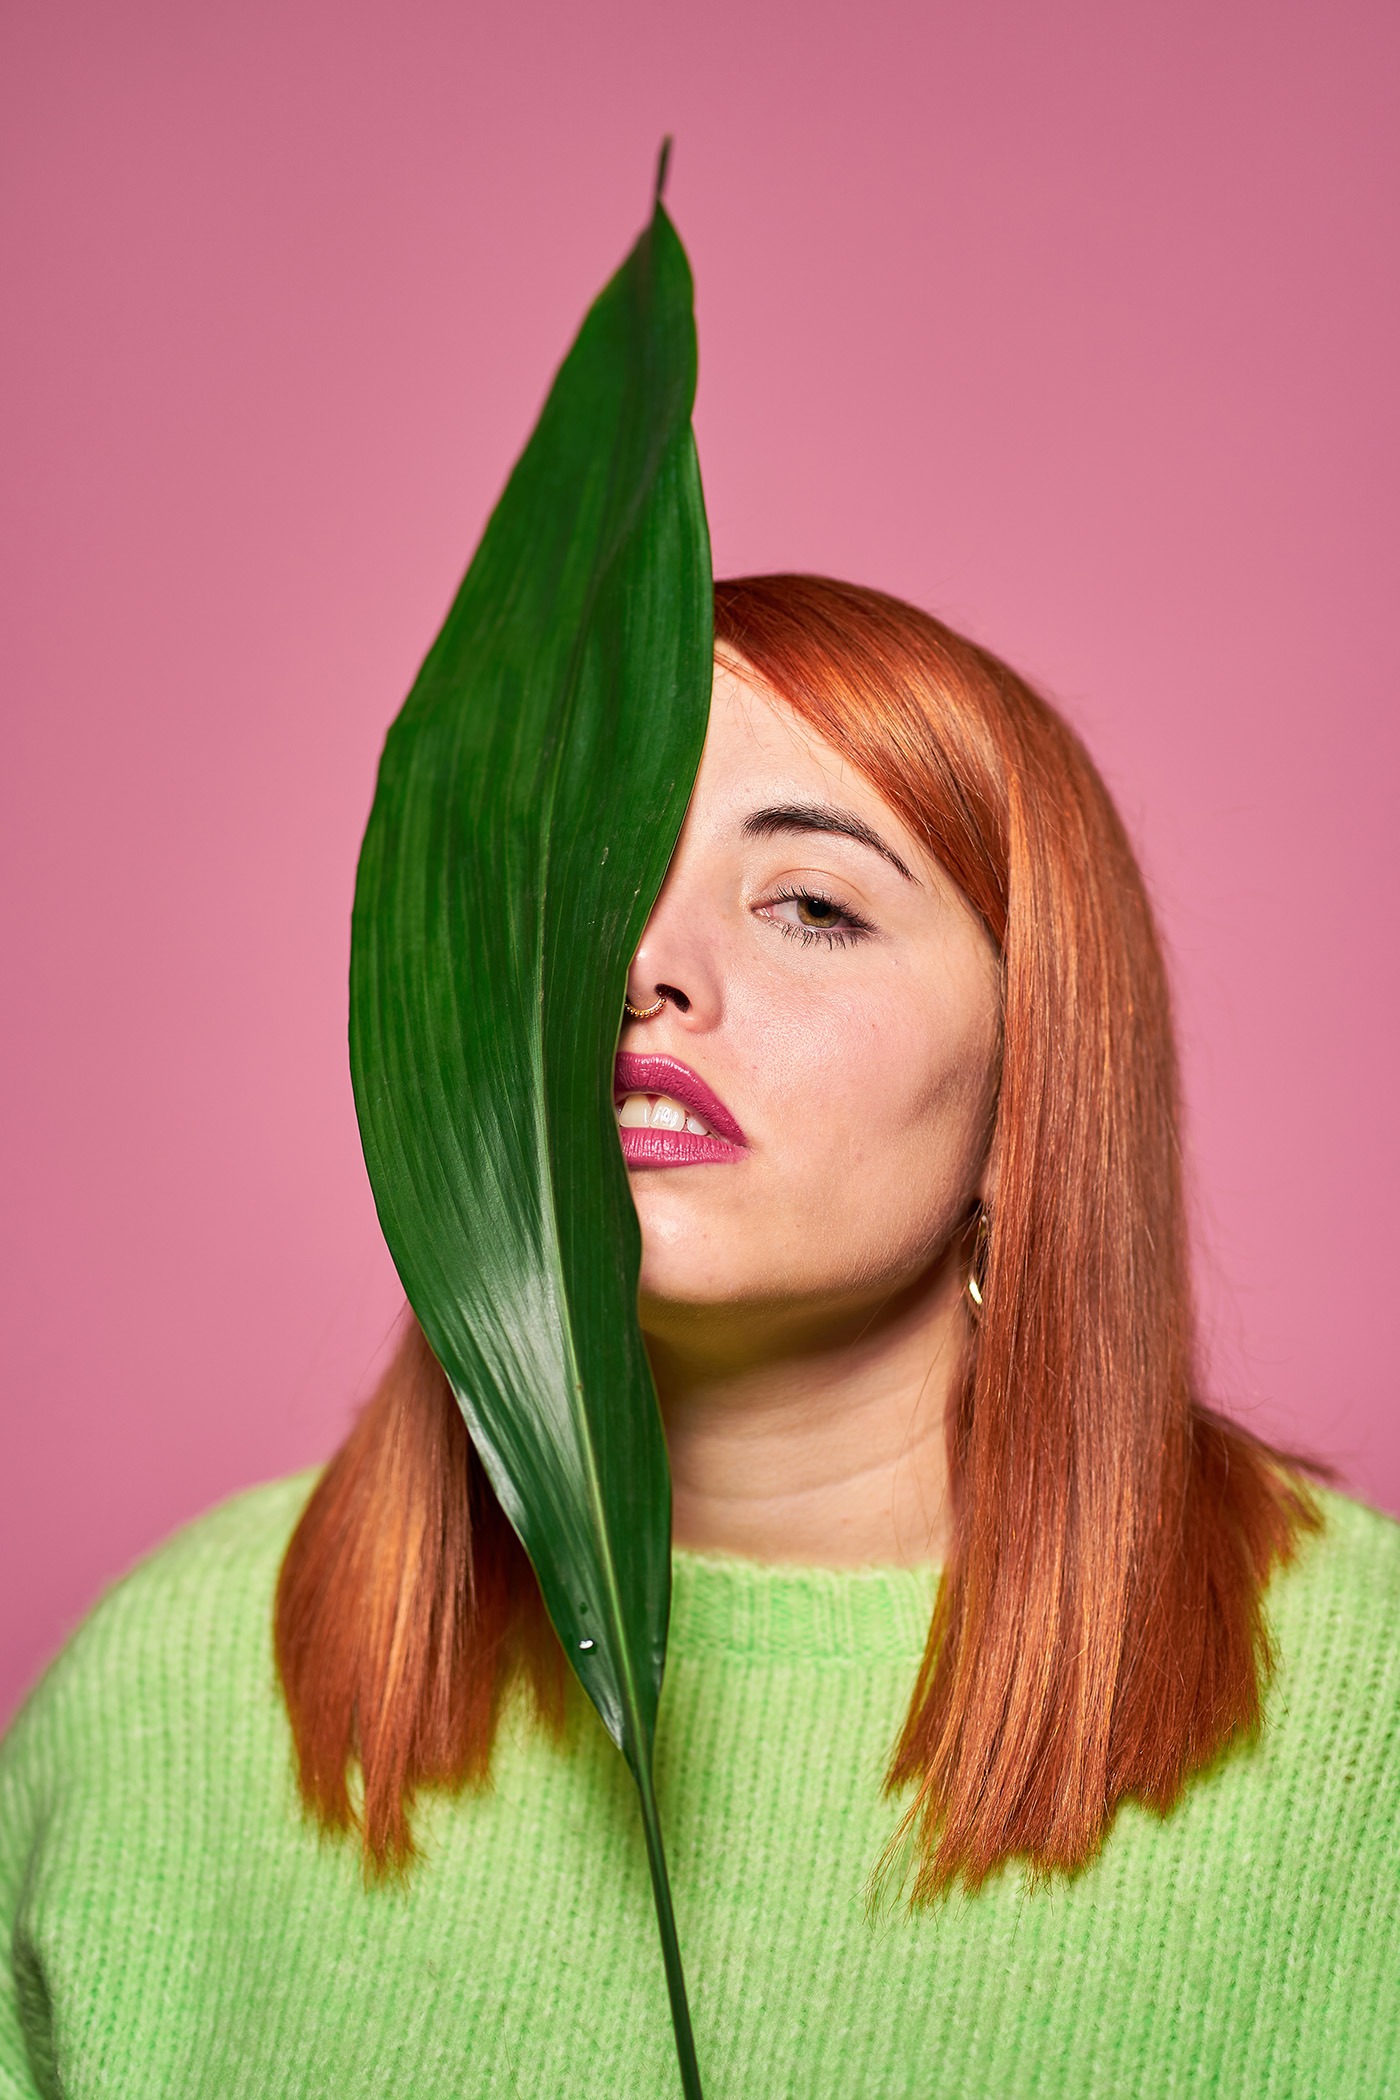 Curve model with red hair keeping green leaf near face and looking at camera against pink background